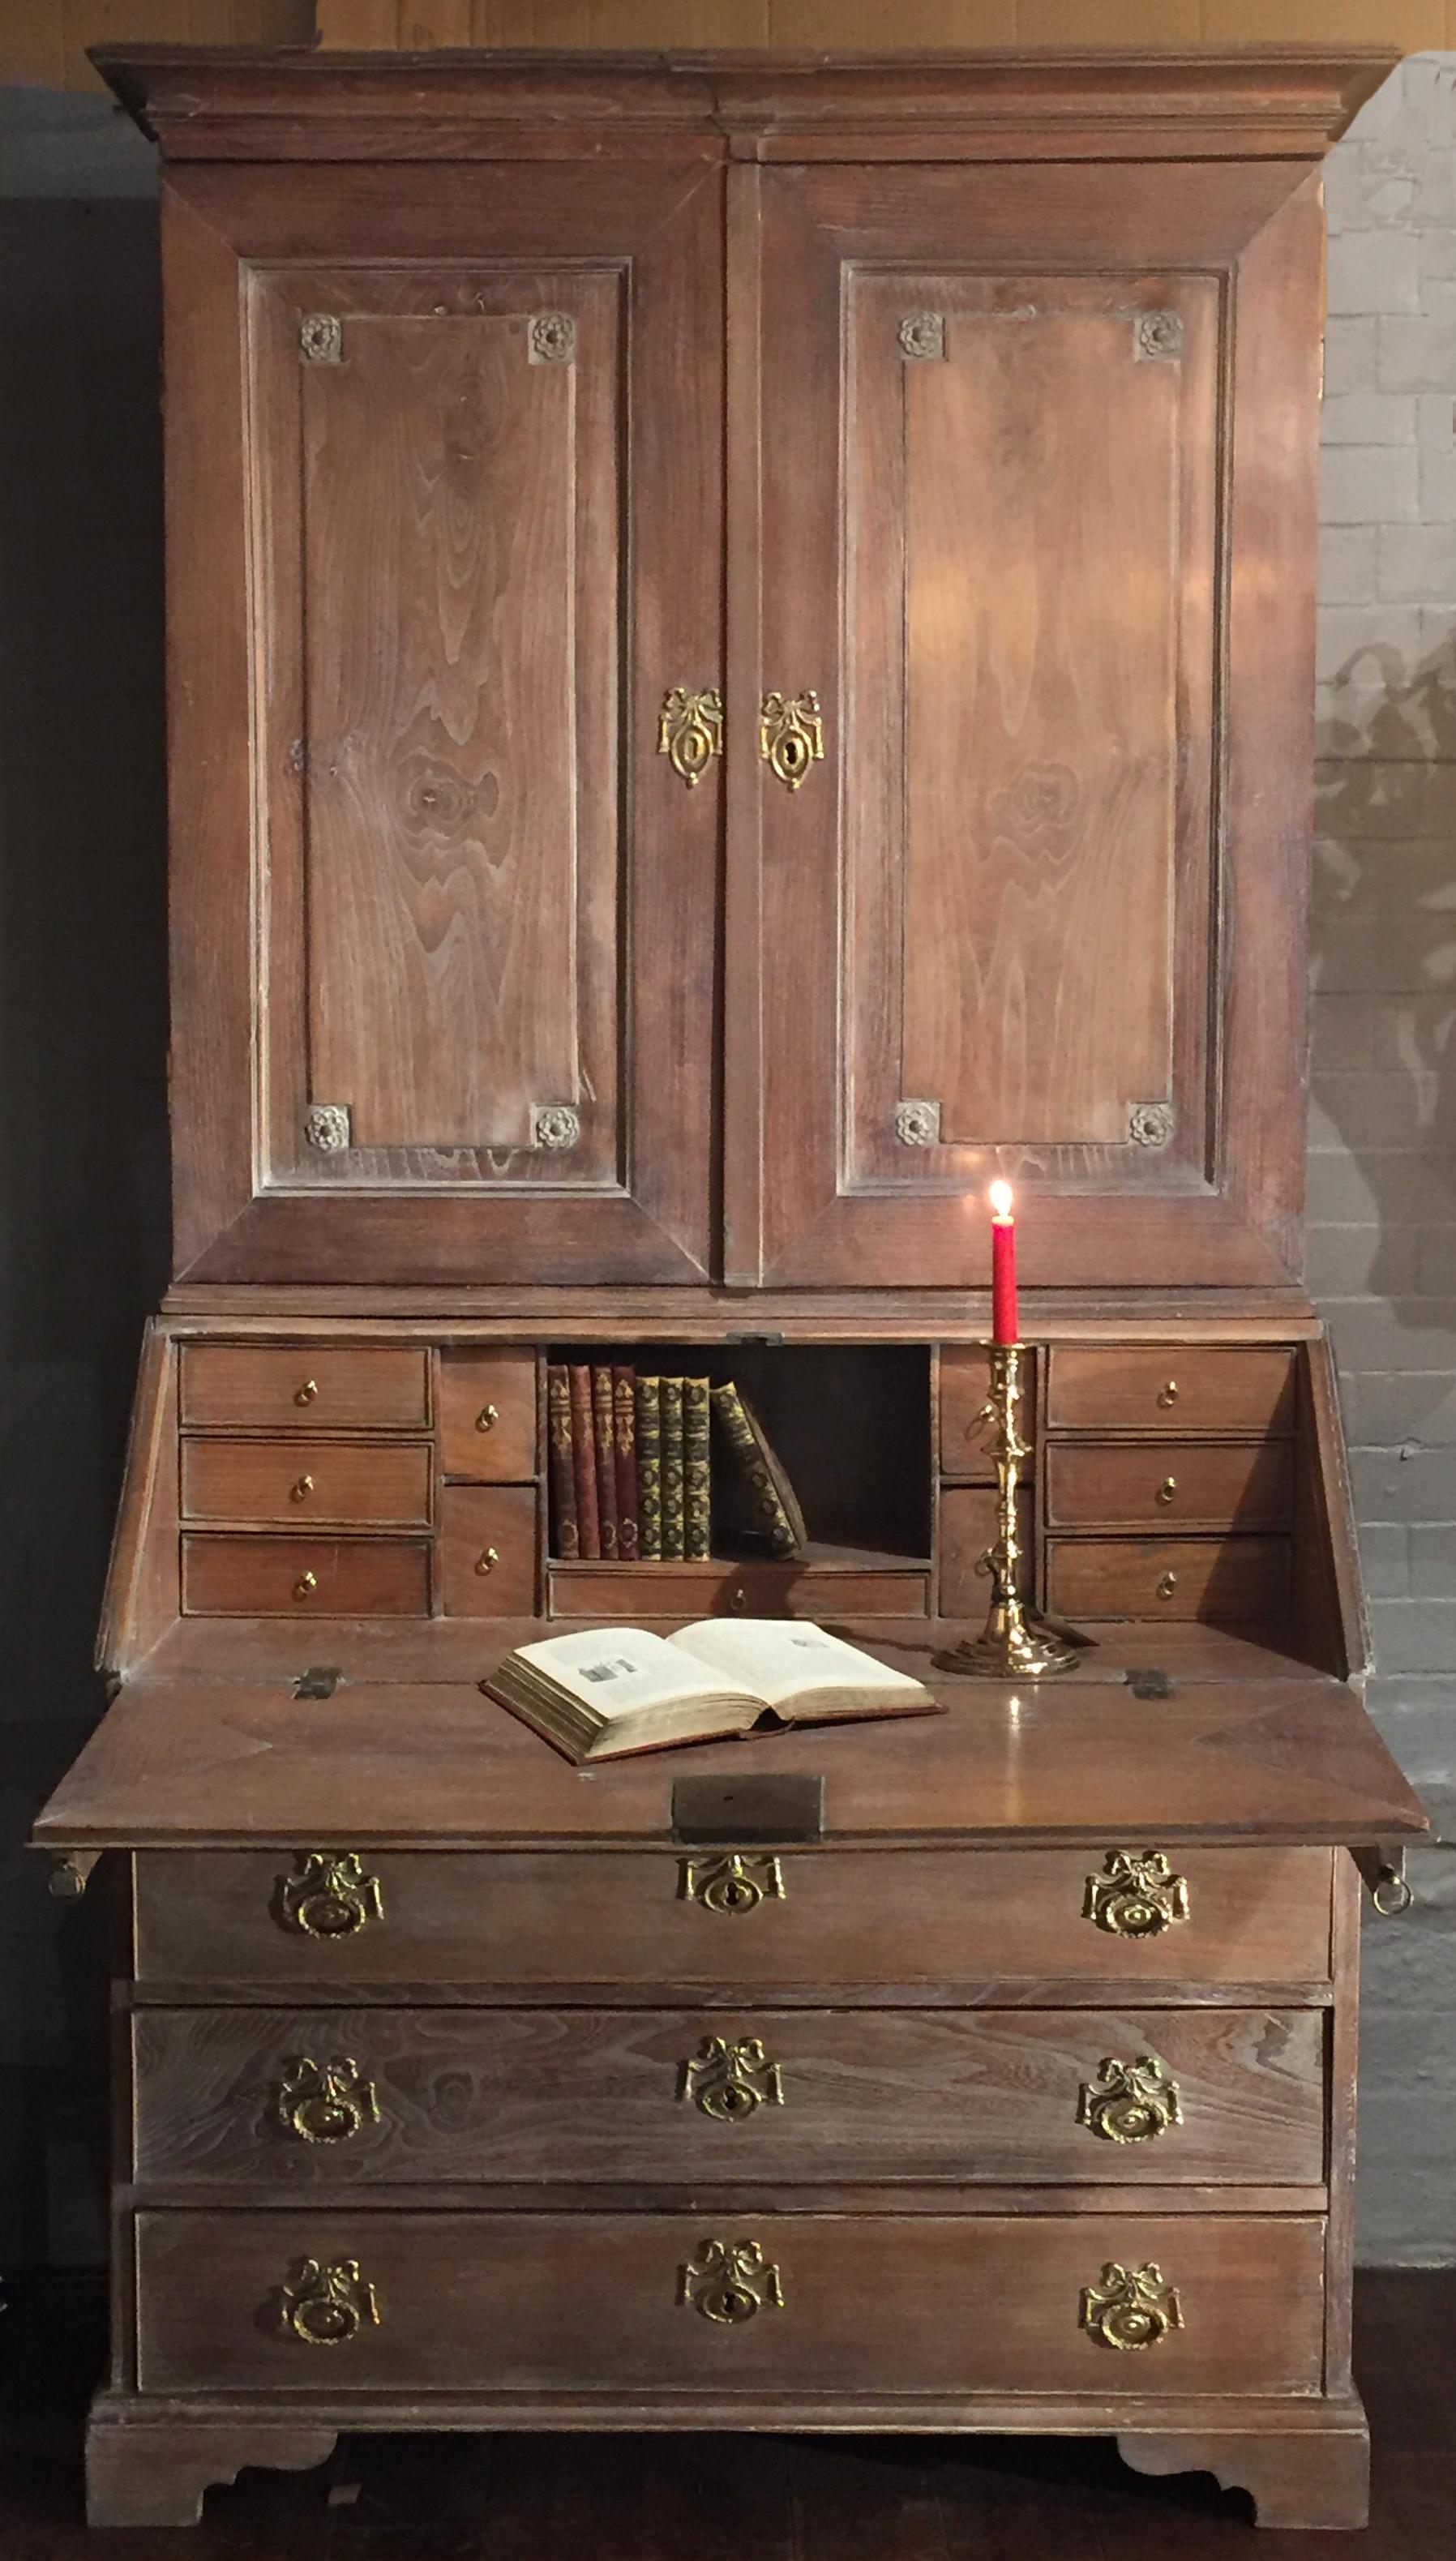 A wonderful 18th century Swedish bureau bookcase of limed elm retaining its original hardware with working locks and keys.
The upper section with double paneled doors, with mitred tenon joints, which open to reveal shelves, pilasters, a lower